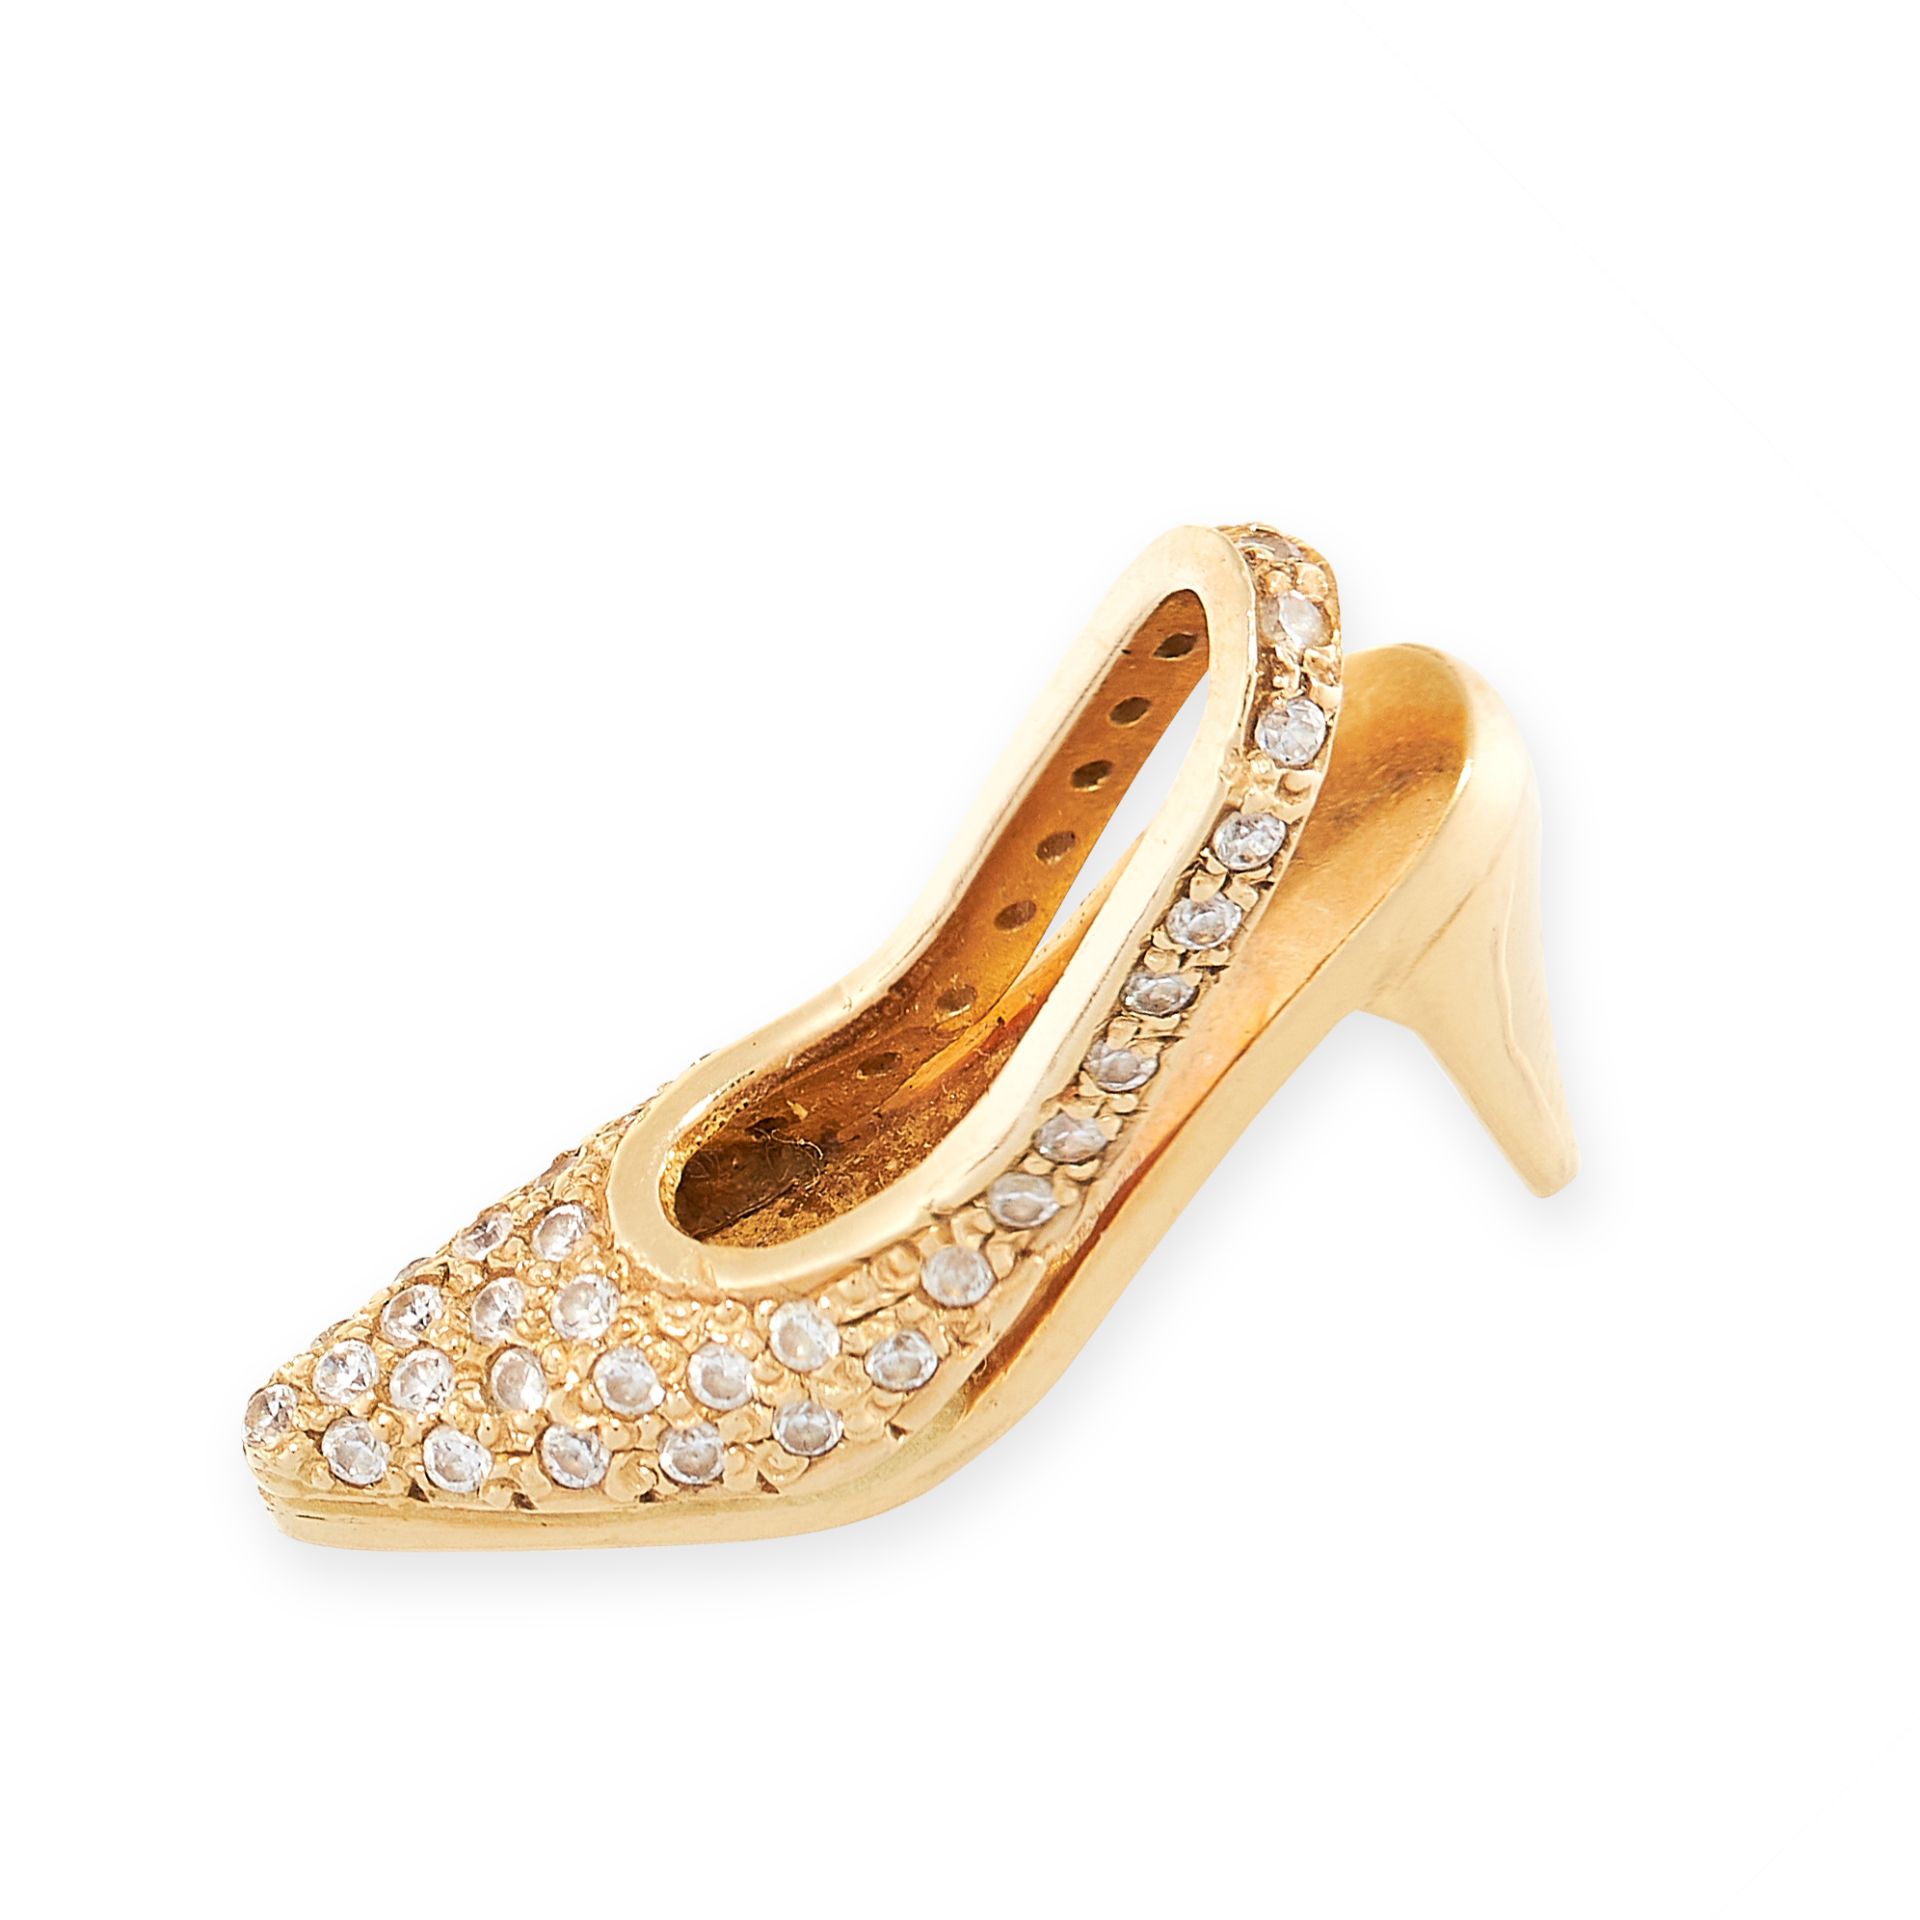 JEWELLED SHOE CHARM / PENDANT mounted in 18ct yellow gold, designed as a high heeled shoe, set